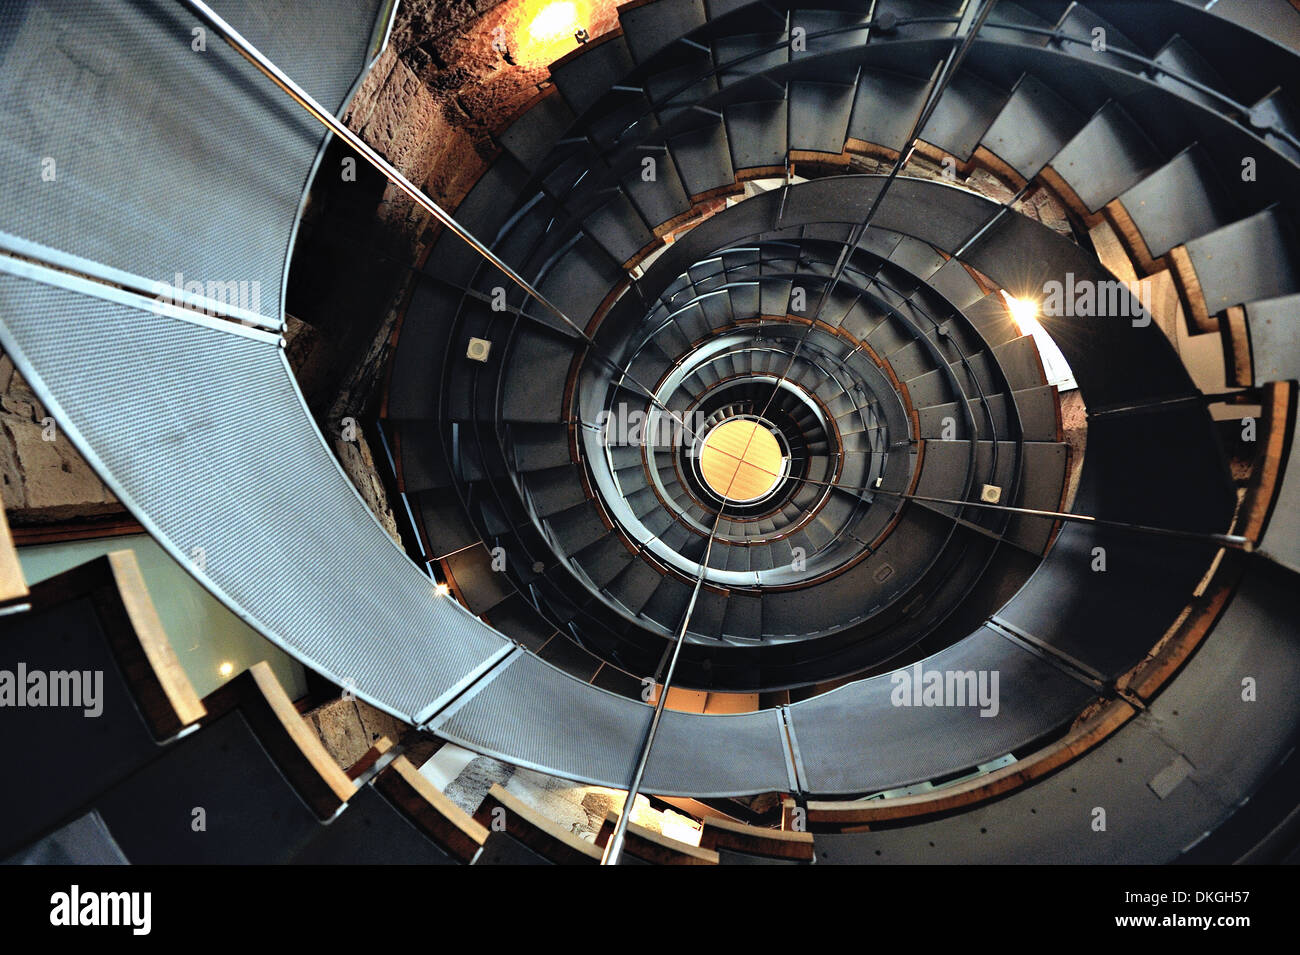 Spiral staircase at the Lighthouse, Glasgow Stock Photo